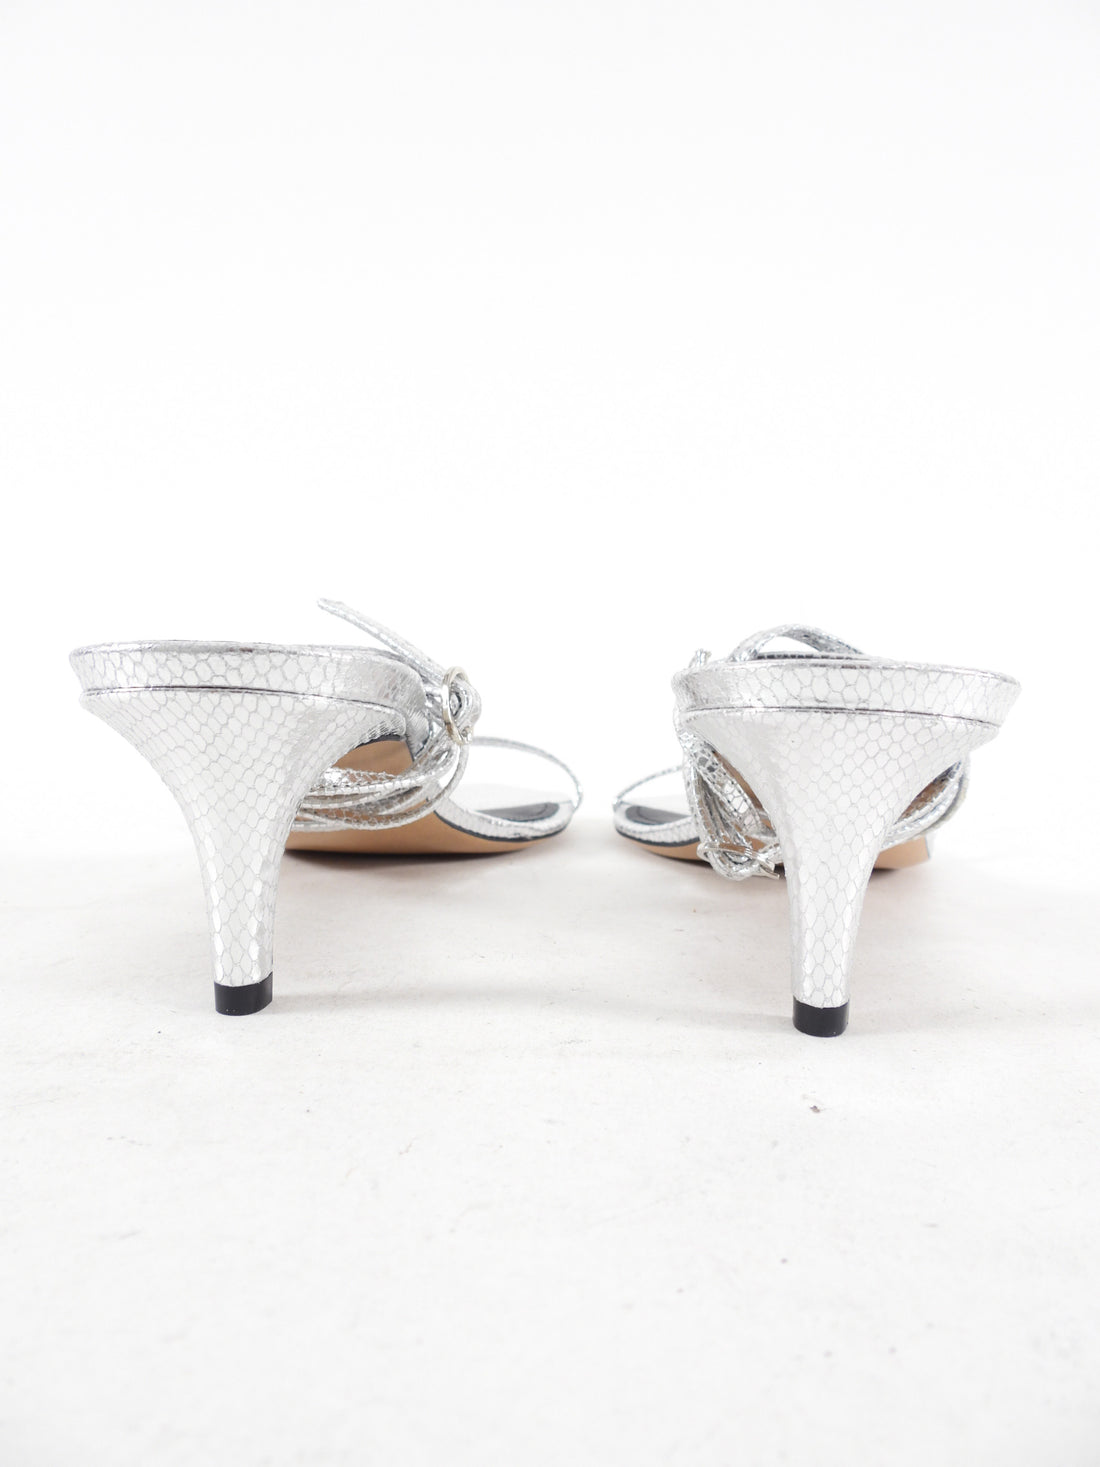 Isabel Marant Silver Metallic Leather Strappy Sandals - 40